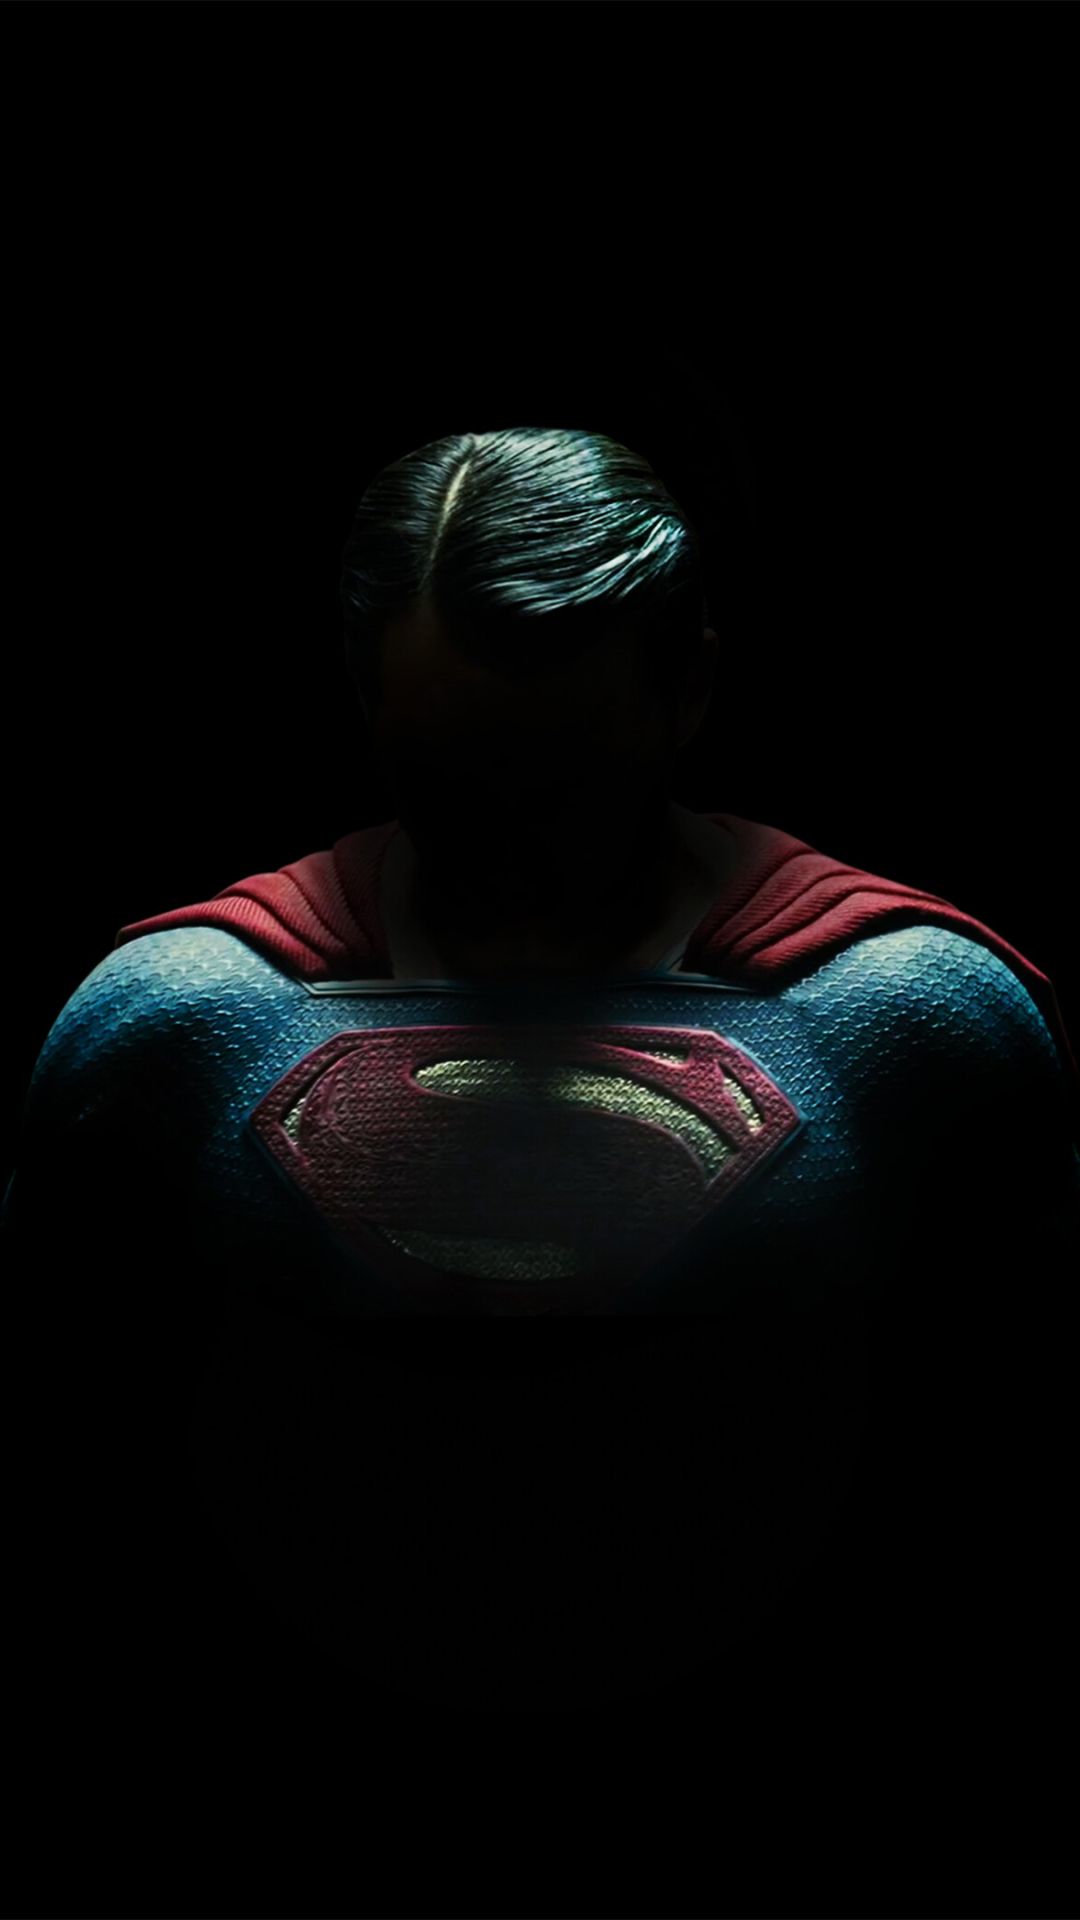 Superman Amoled iPhone 6s, 6 Plus and Pixel XL , One Plus 3t, 5 Wallpaper, HD Superheroes 4K Wallpaper, Image, Photo and Background